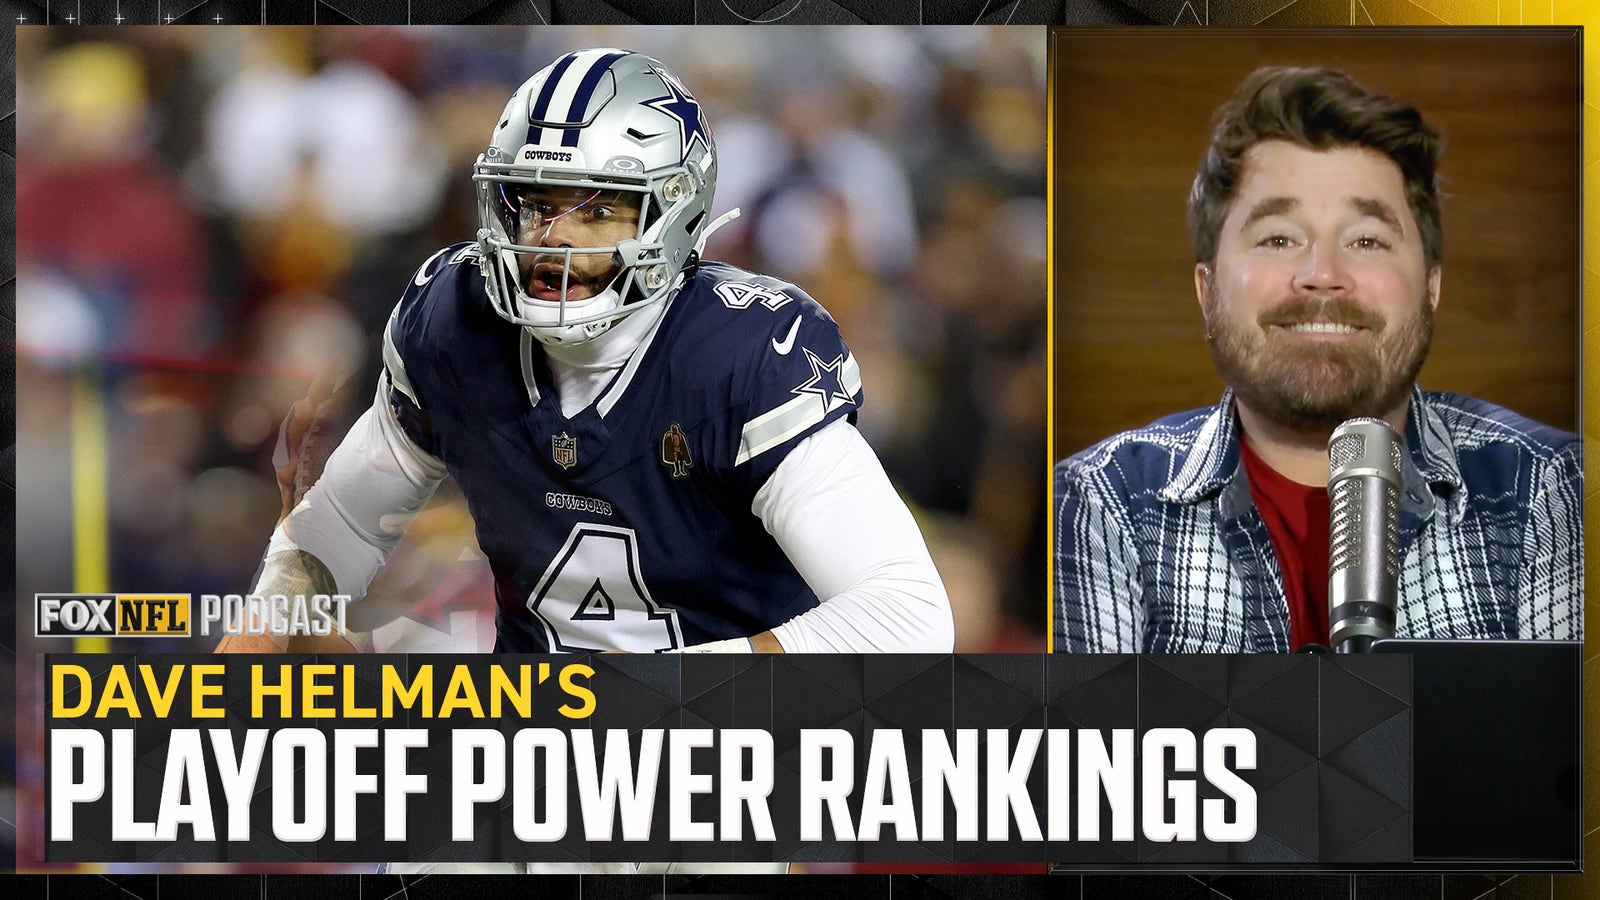 With the playoffs right around the corner, Dave Helman reveals his NFL power rankings!